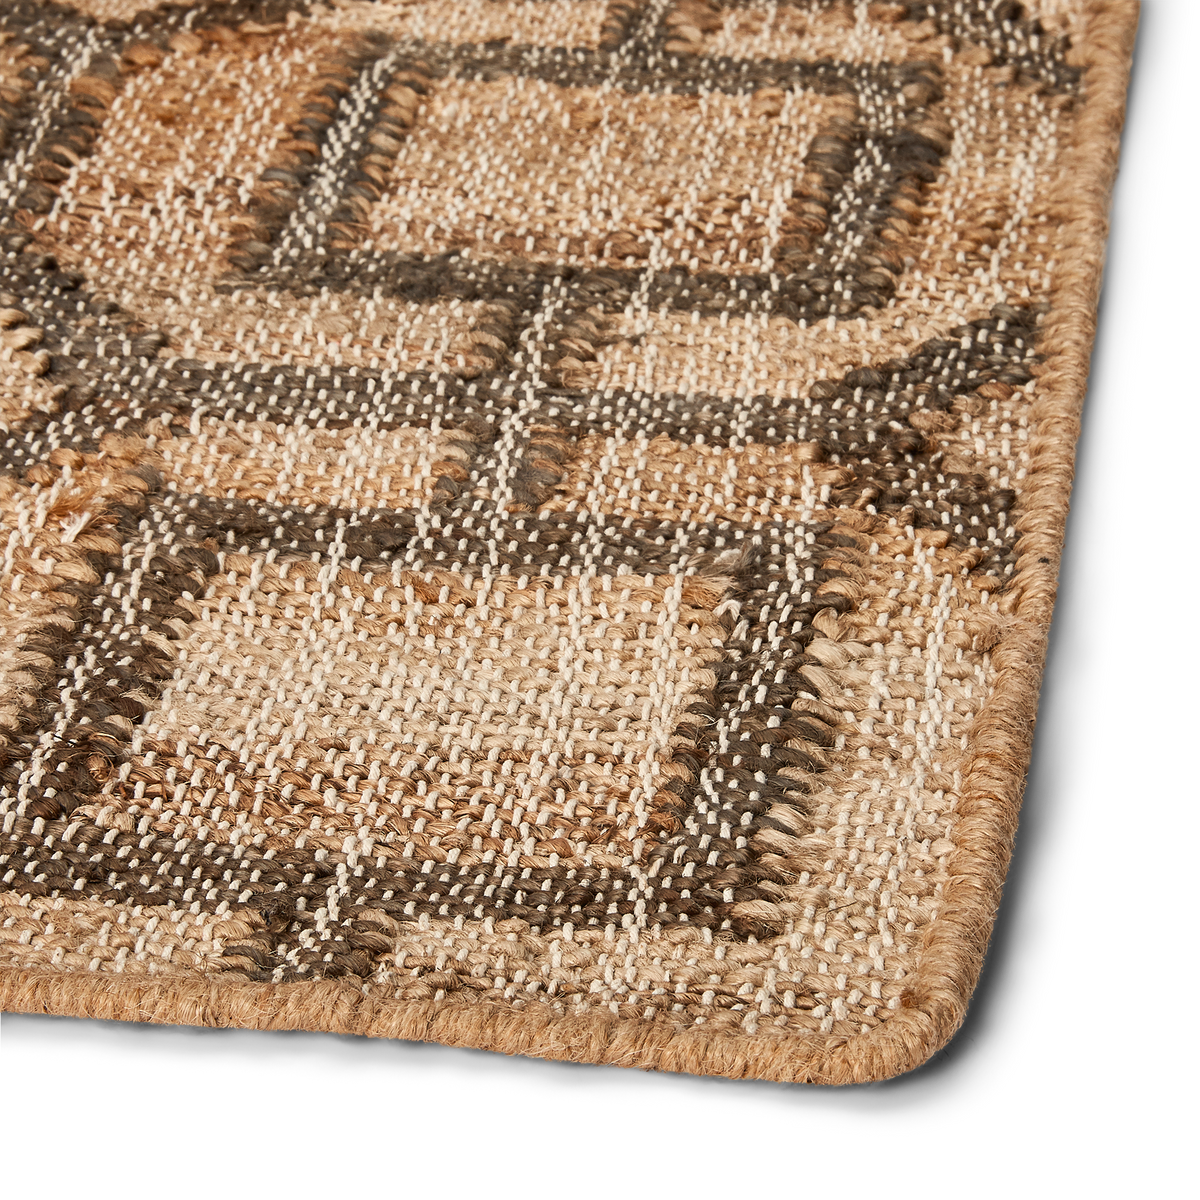 Detail view of rug corner, showing fully stitched and rounded corner, consistent weave, and blend of natural earthtone colors.